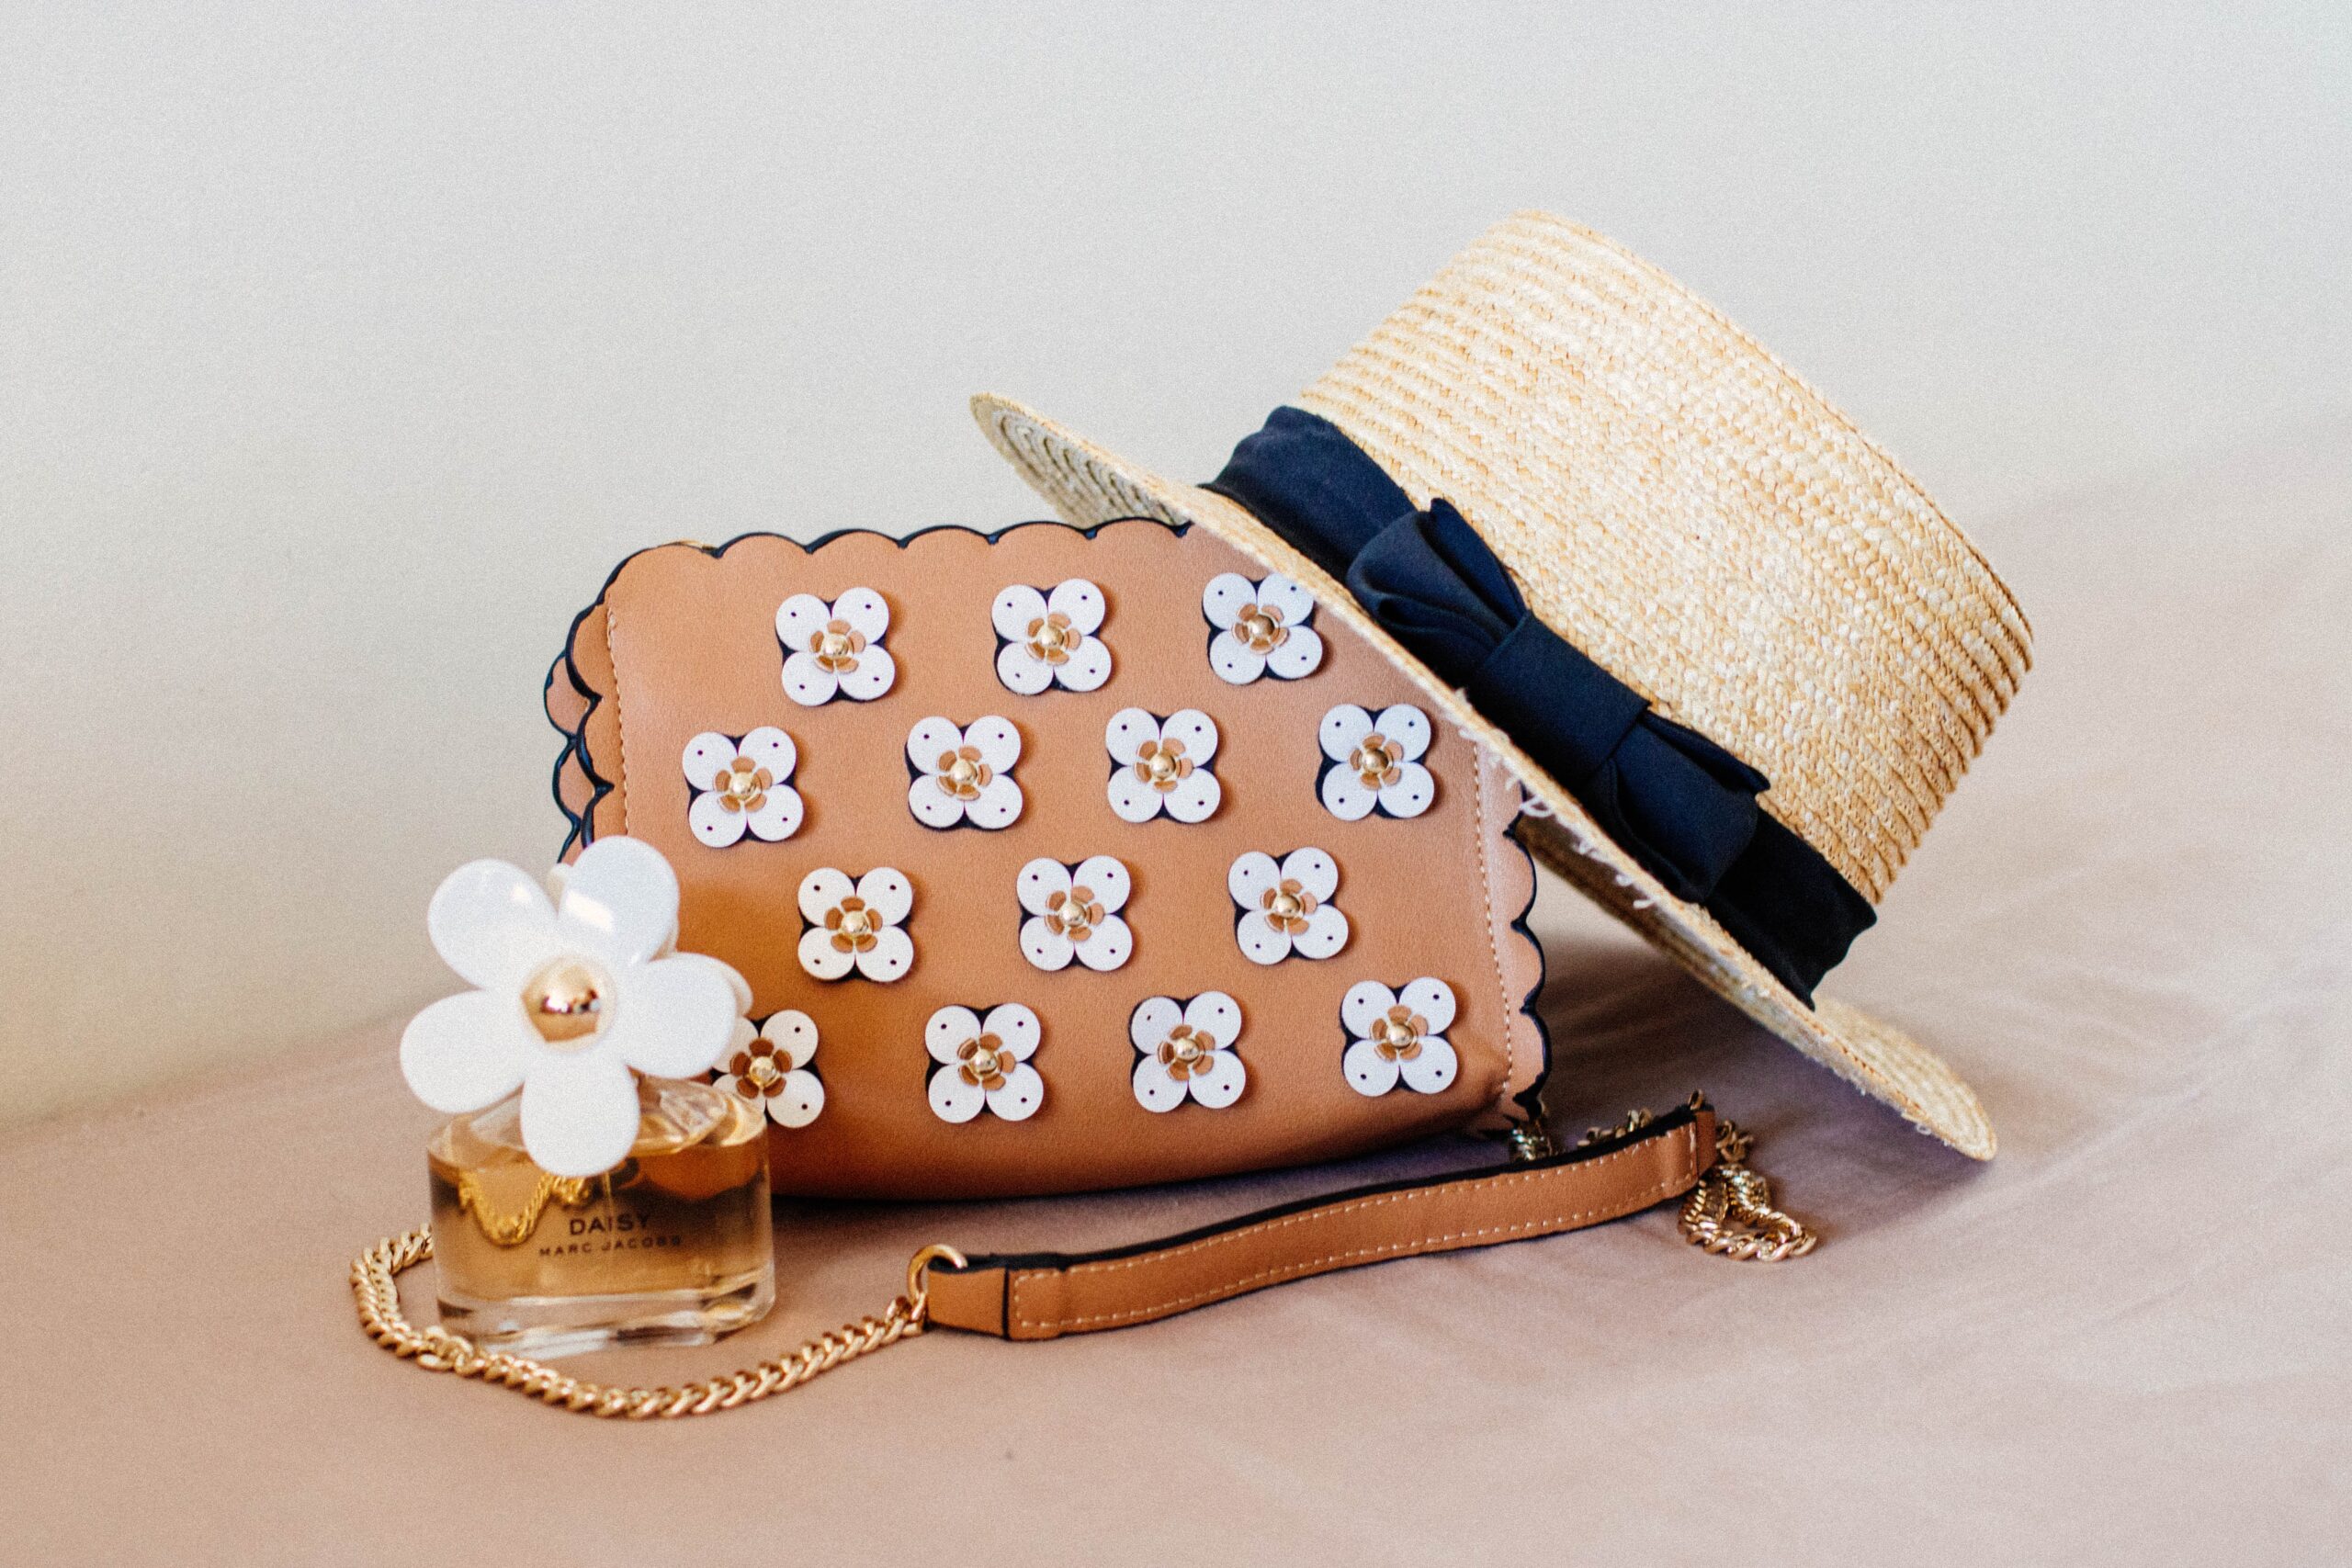 A straw hat with a black bow tied around it and a brown leather purse adorned with white flowers, both perfect accessories for a senior portrait session with Erin Daugherty Photography.